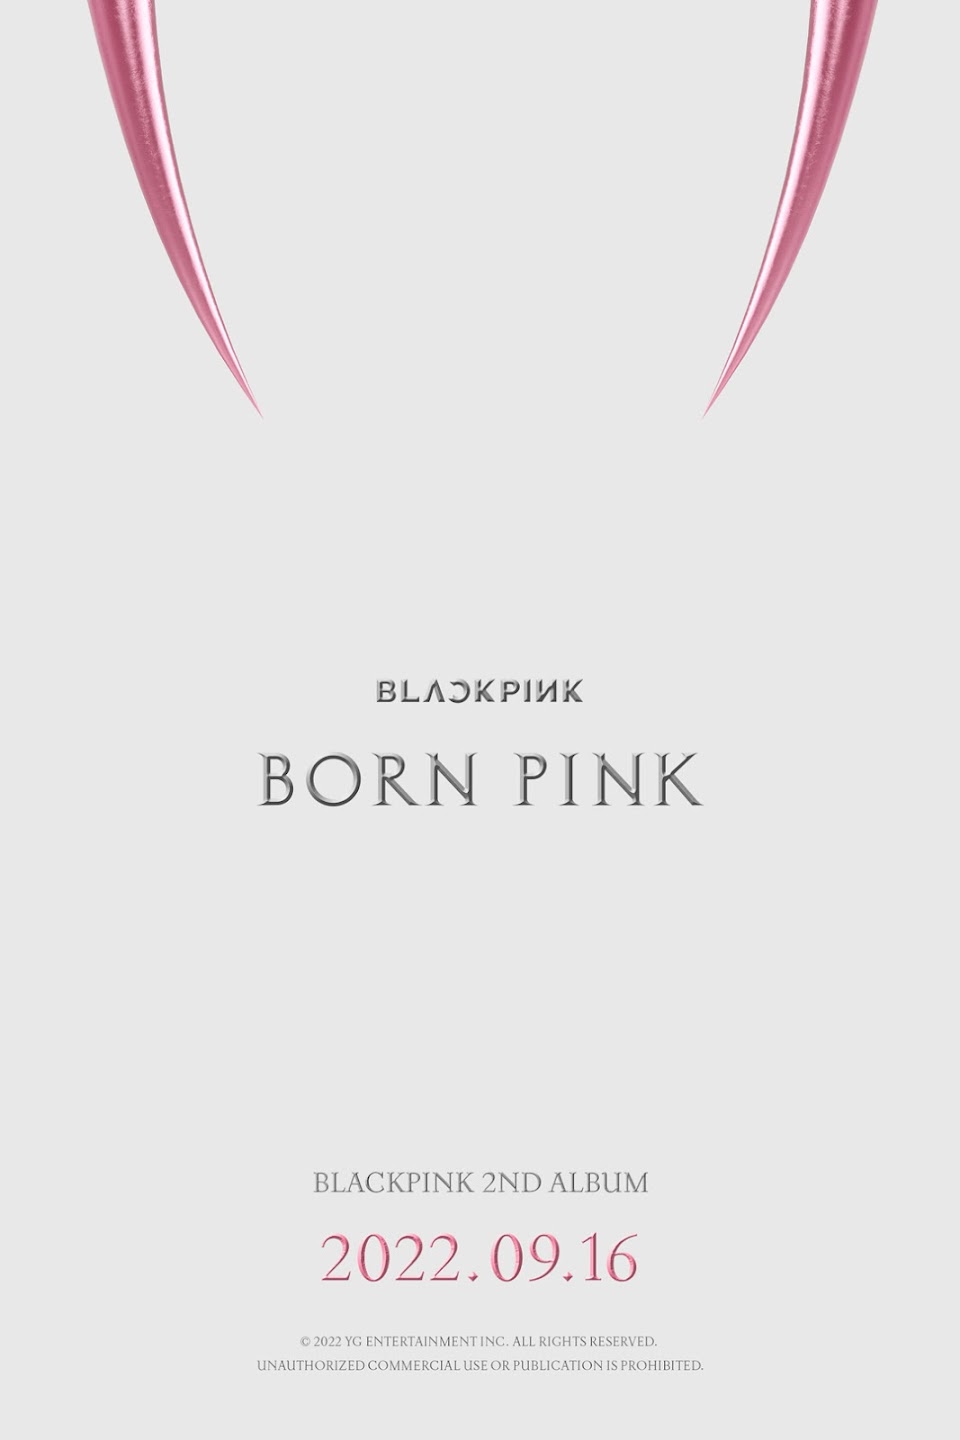 BLACKPINK's Pink Venom Teaser Image Are Unlike Any They've Released Before